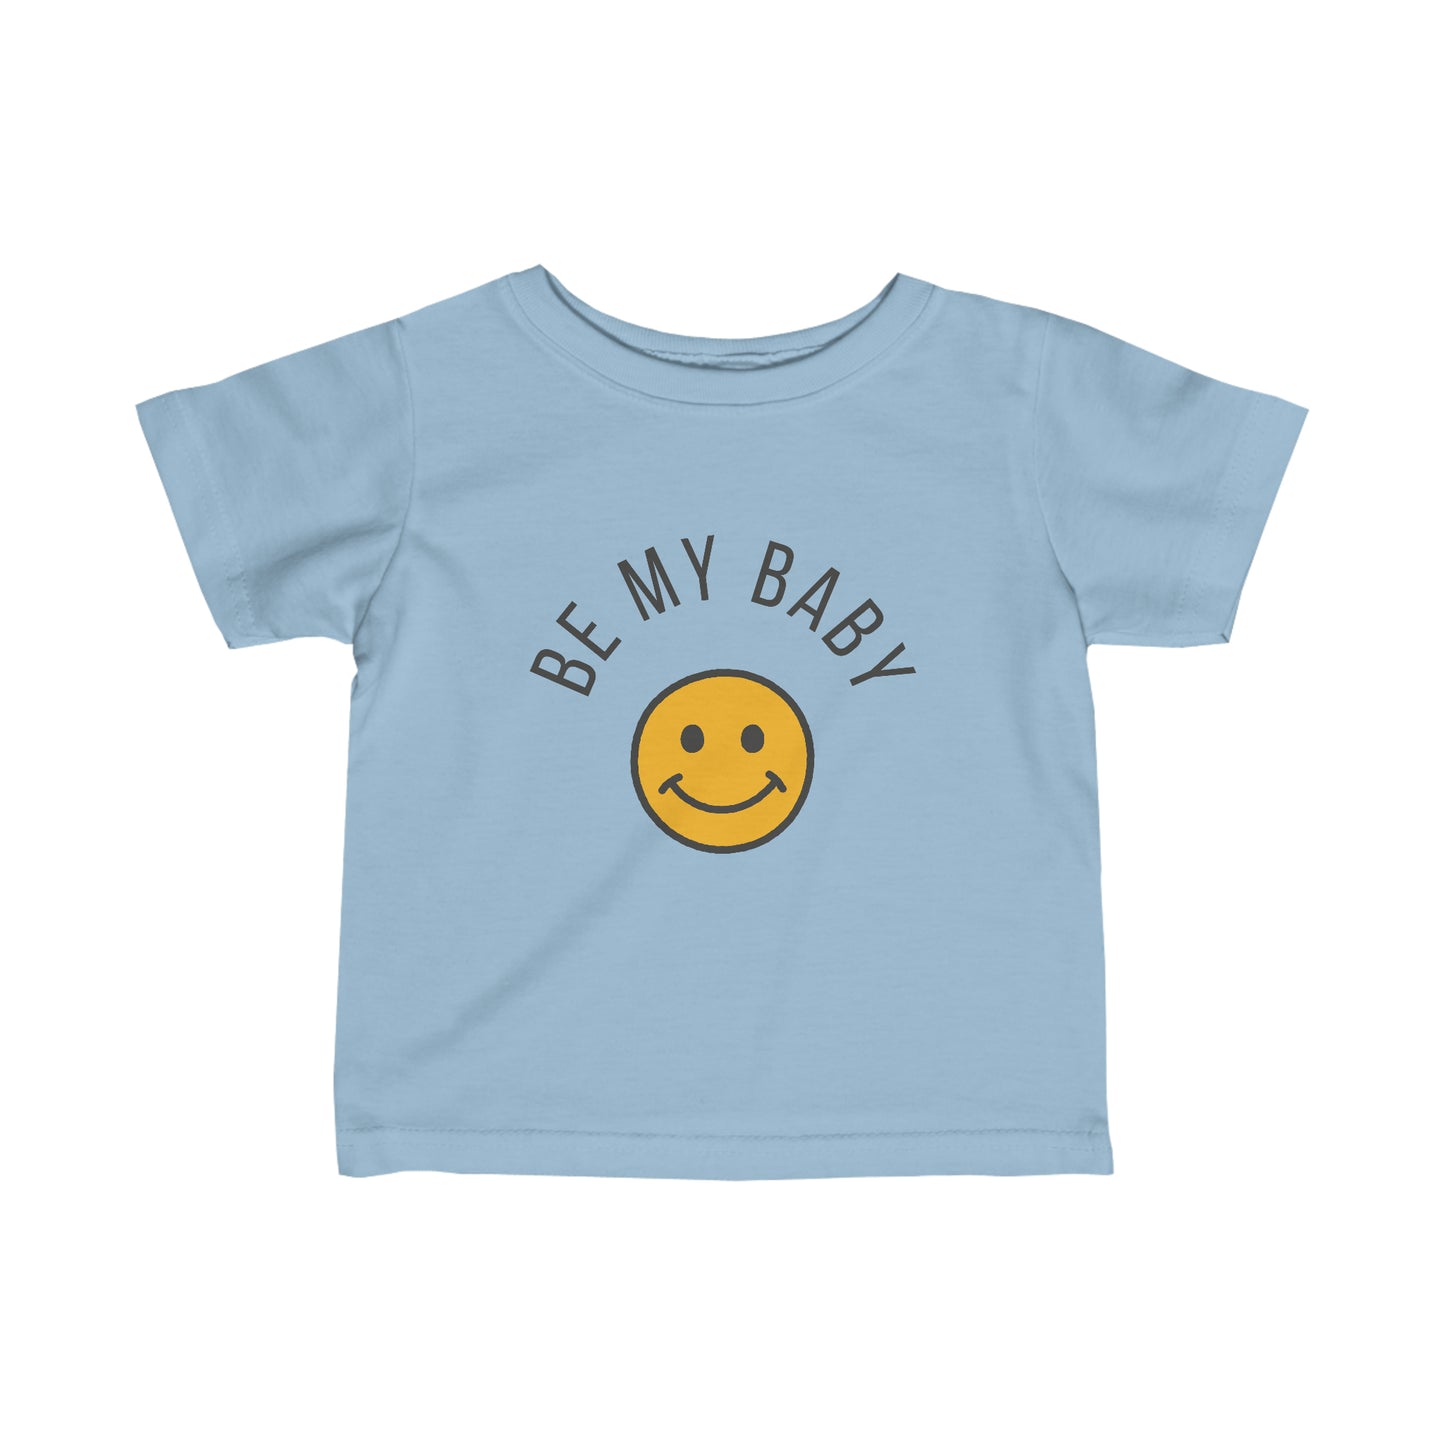 BE MY BABY unisex print short-sleeved t-shirt for 6m-24m